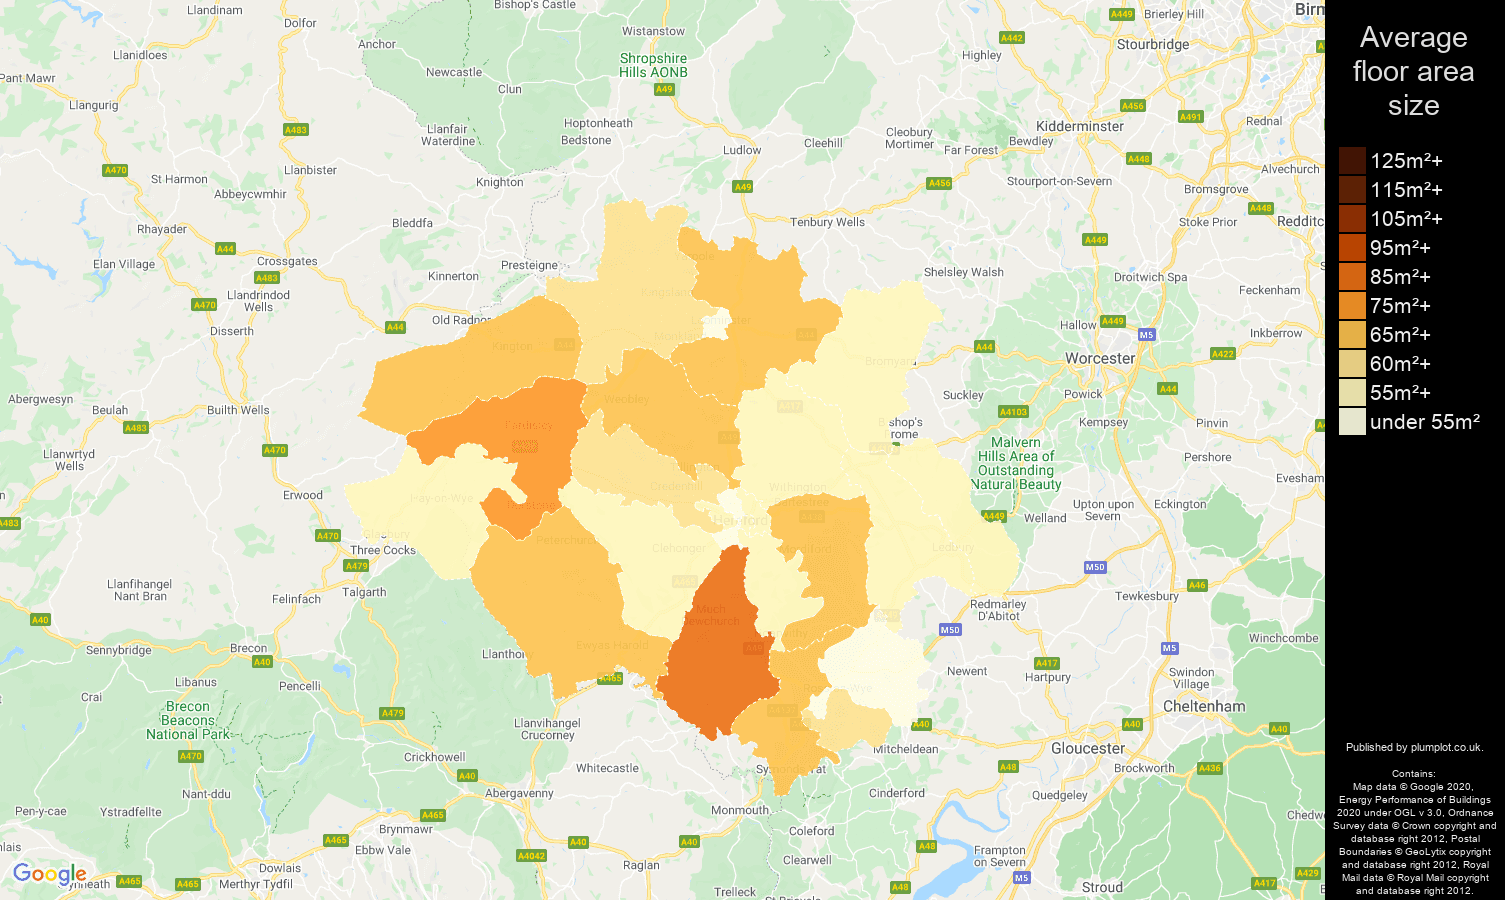 Hereford map of average floor area size of flats